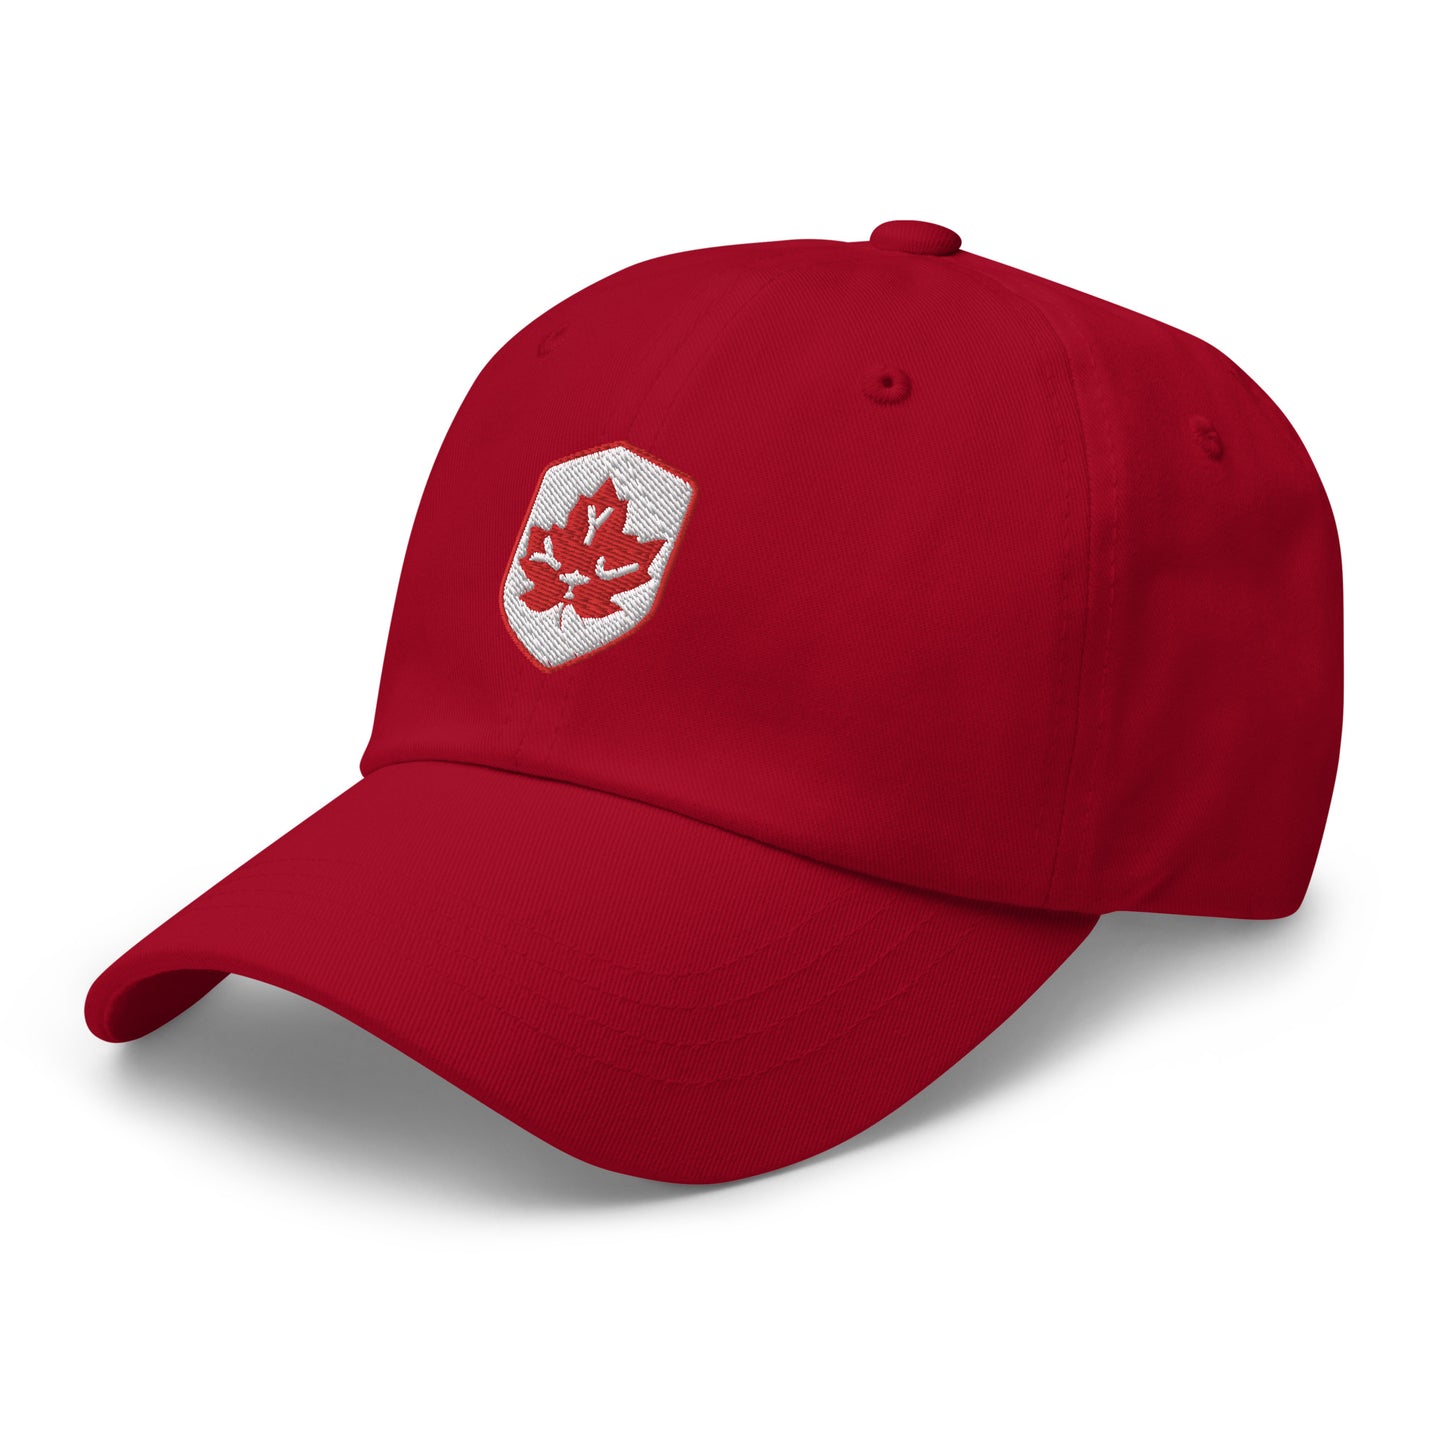 Maple Leaf Baseball Cap - Red/White • YYJ Victoria • YHM Designs - Image 16